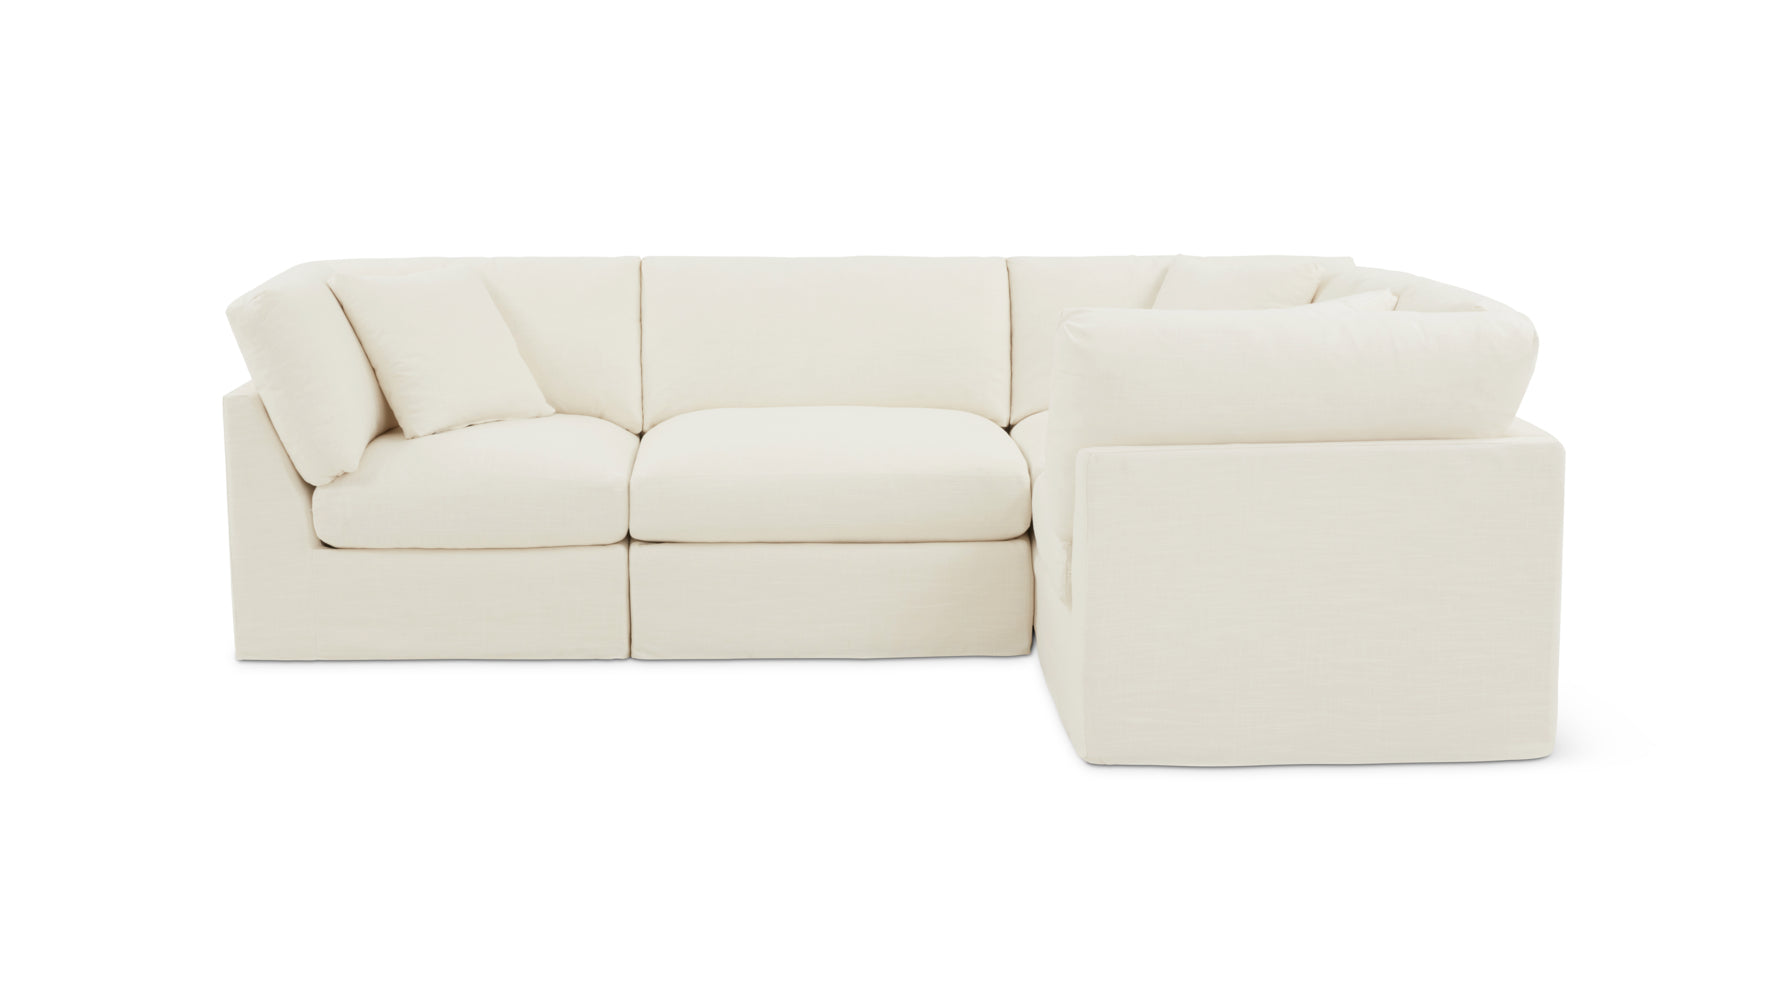 Get Together™ 4-Piece Modular Sectional Closed, Standard, Cream Linen - Image 1